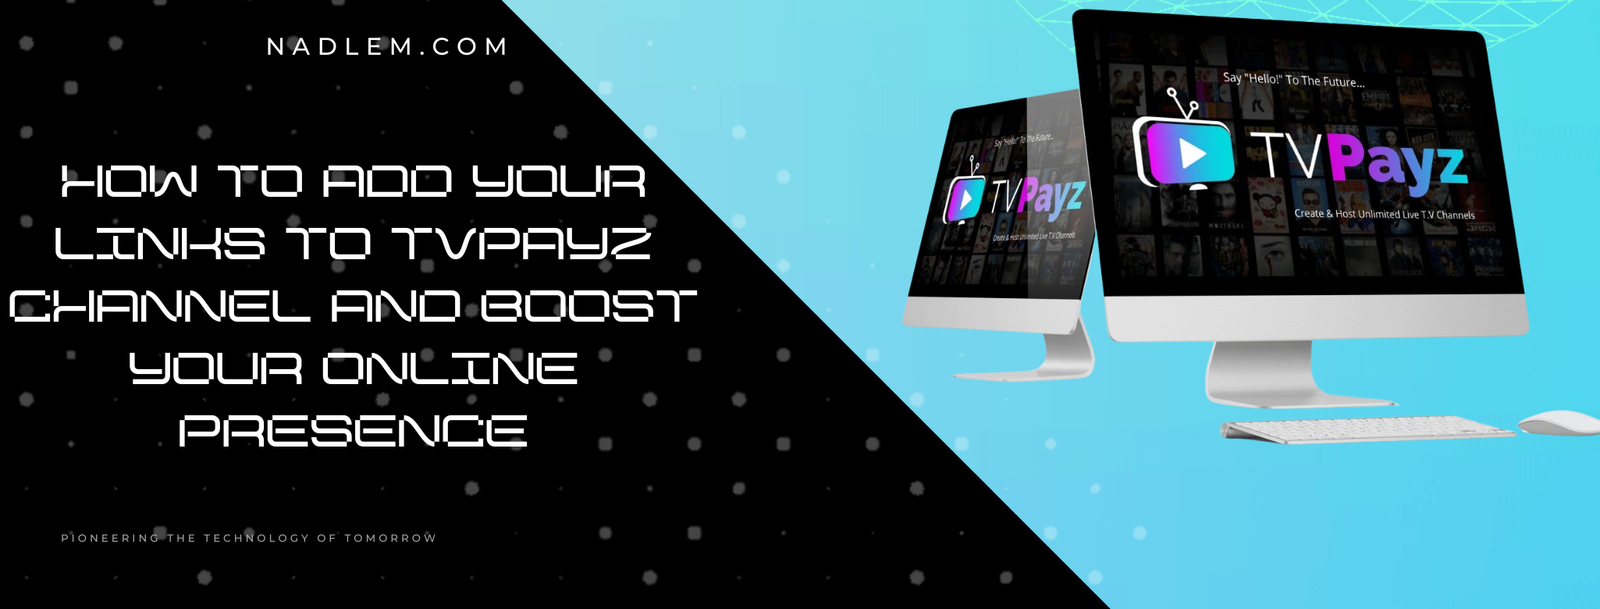 How to Add Your Links to TVPayz Channel and Boost Your Online Presence